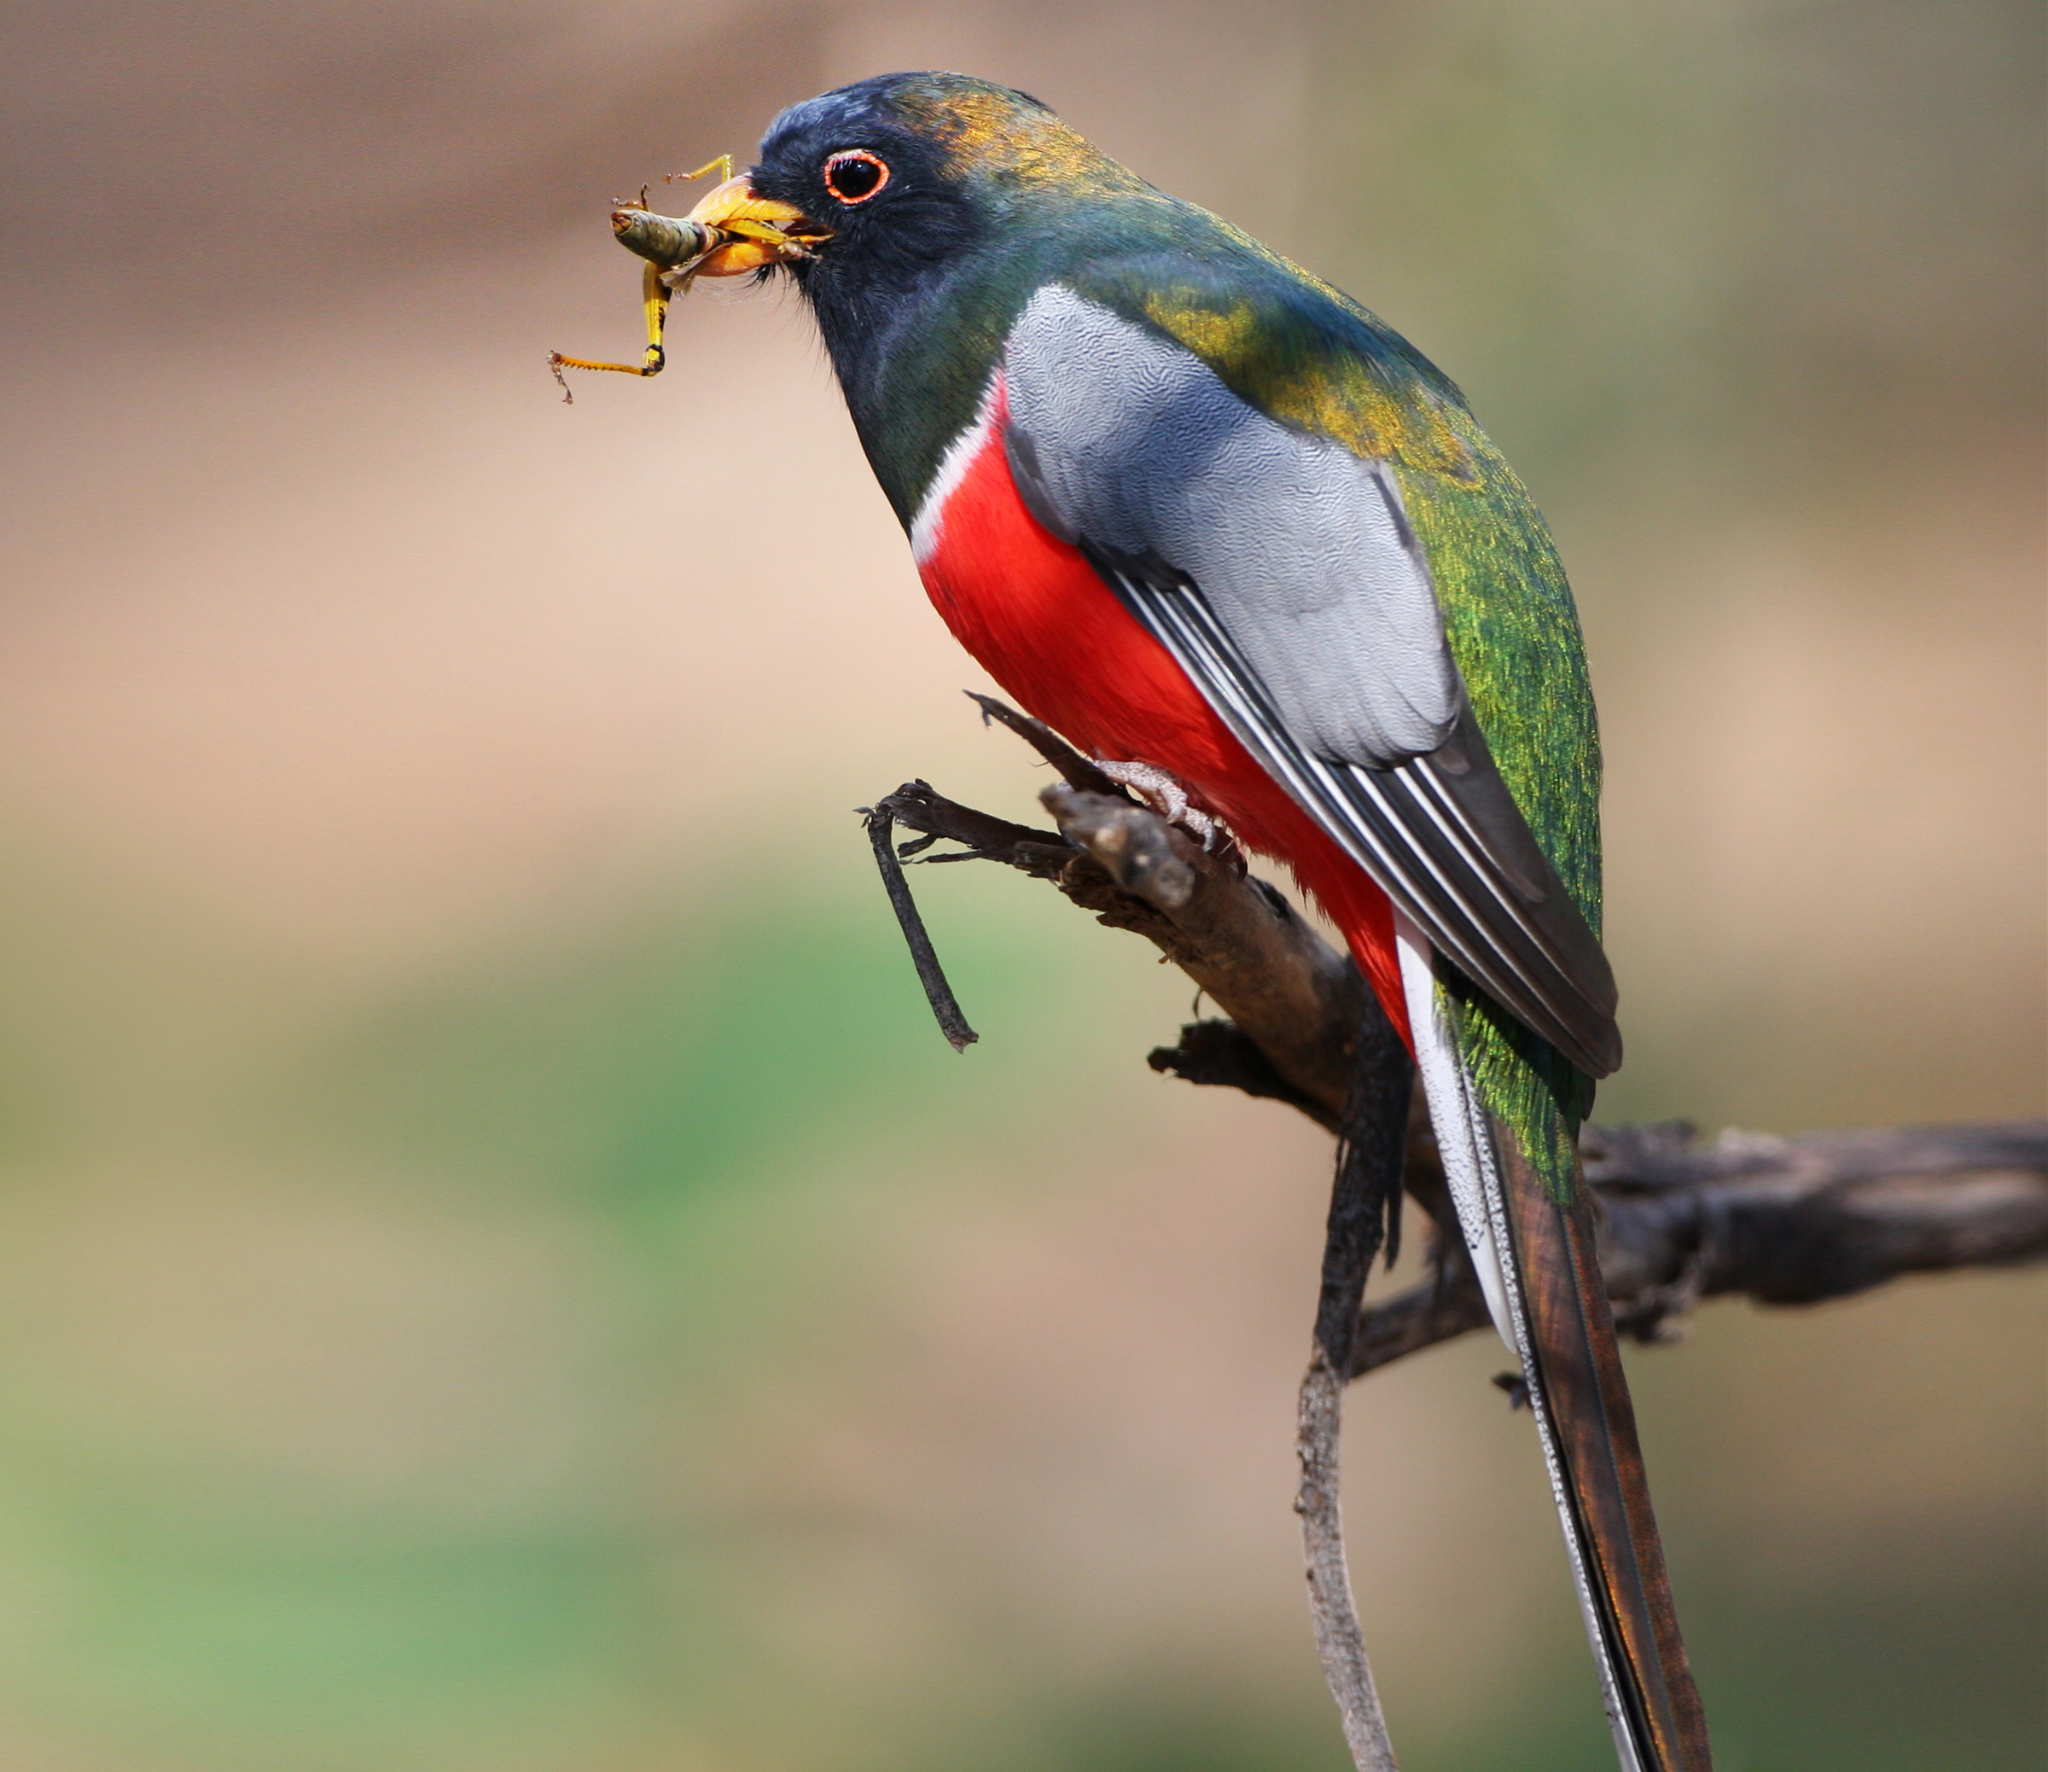 The Elegant Trogon is an amazing sight to see during hikes in Sayulita for its beautiful 